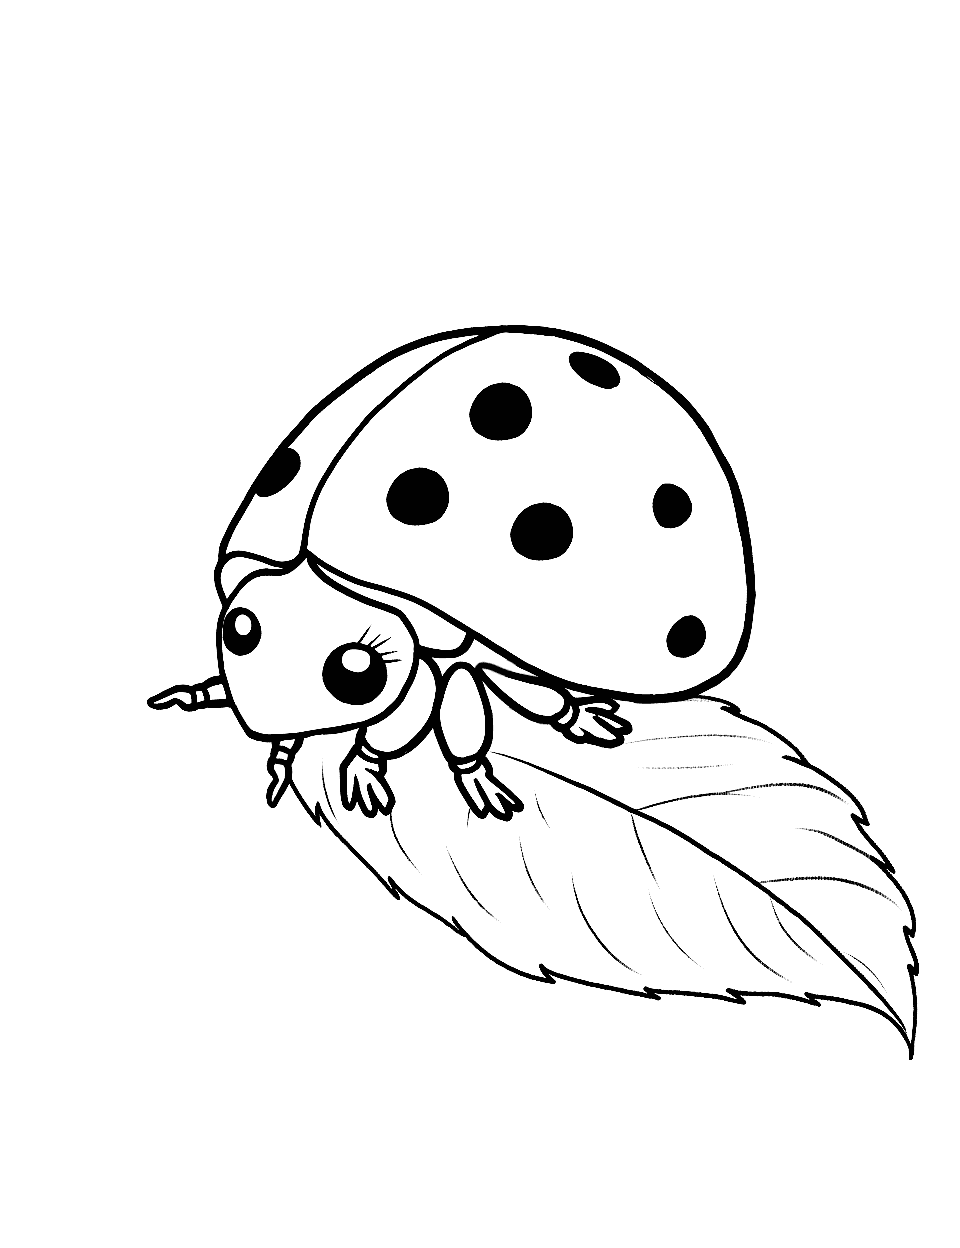 Baby Ladybug Learning to Crawl Coloring Page - A tiny baby ladybug taking its first steps on a leaf.